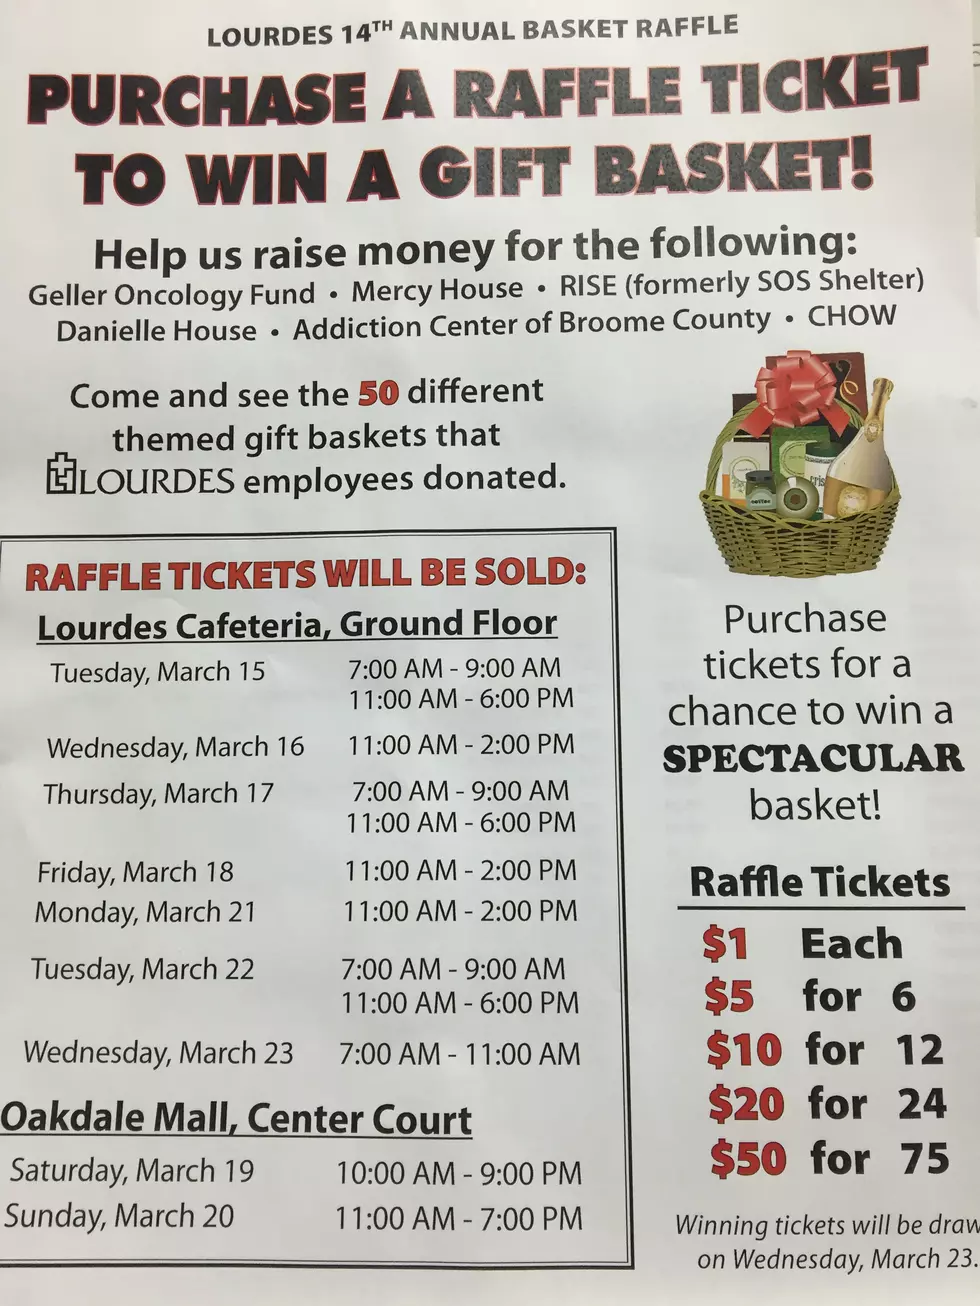 Lourdes Basket Raffle Is This Weekend At The Oakdale Mall [LISTEN]